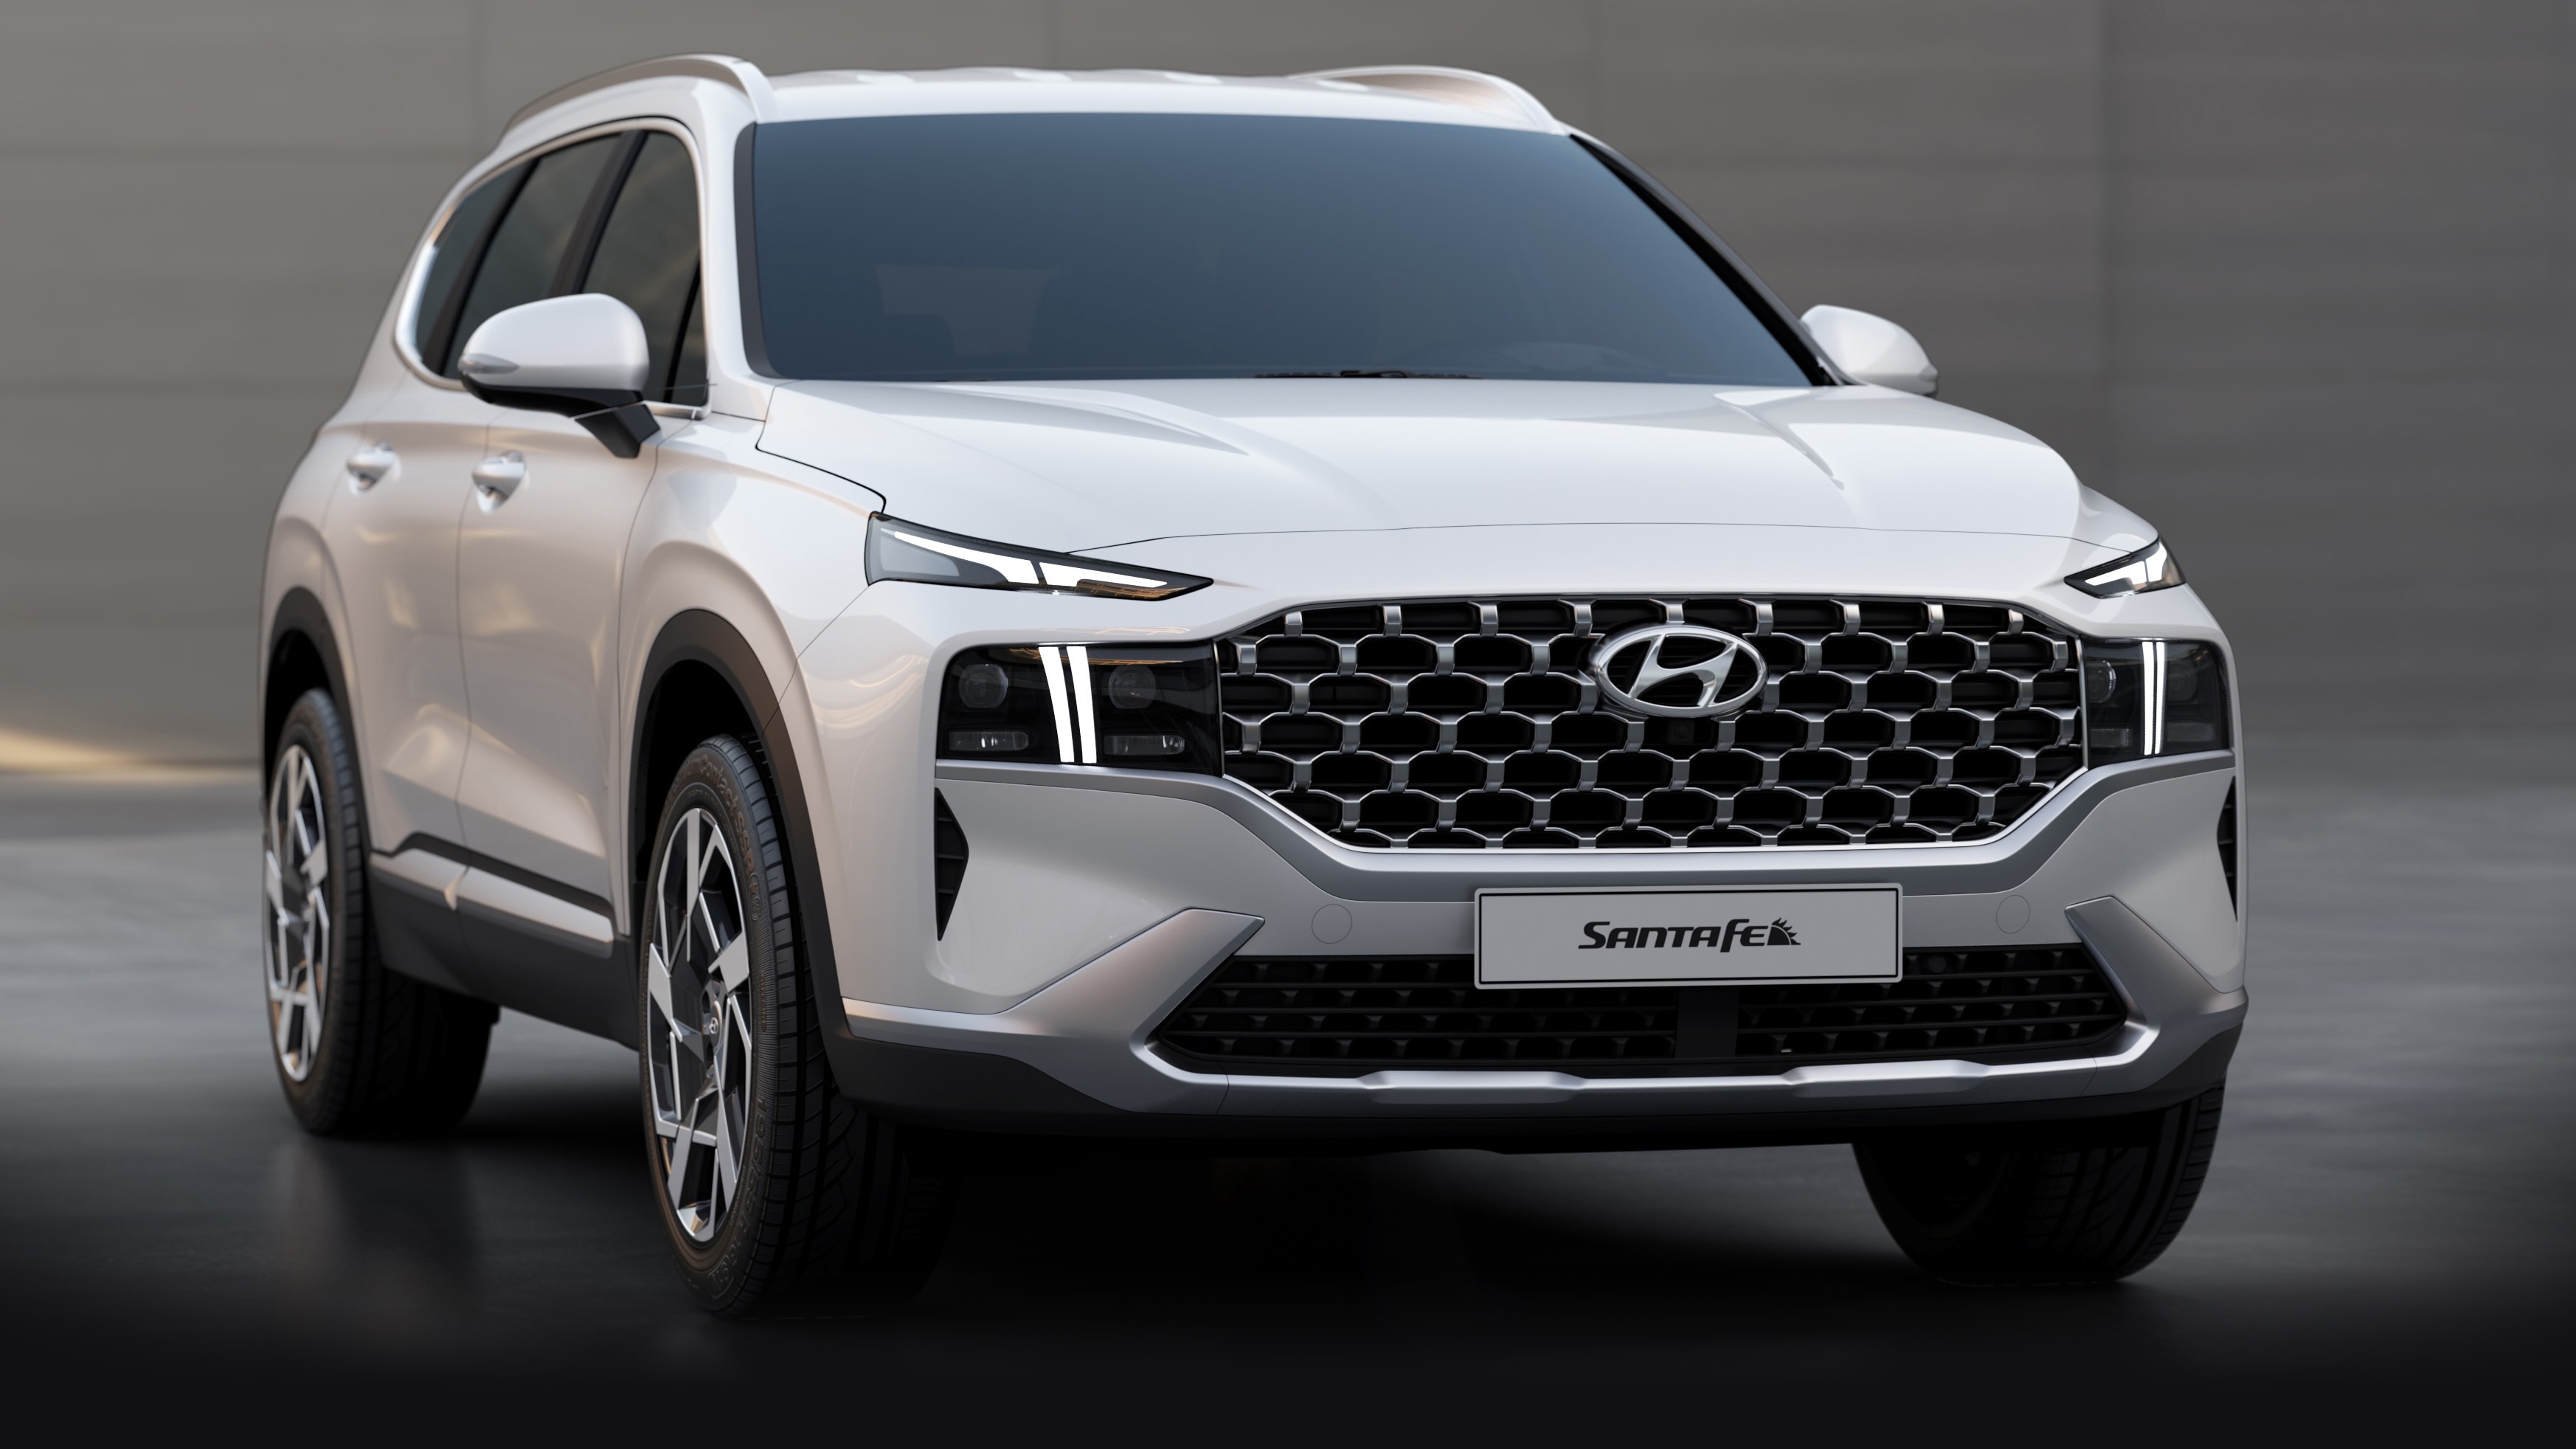 Hyundai's latest sevenseat Sante Fe due at year end breaks cover  2GB